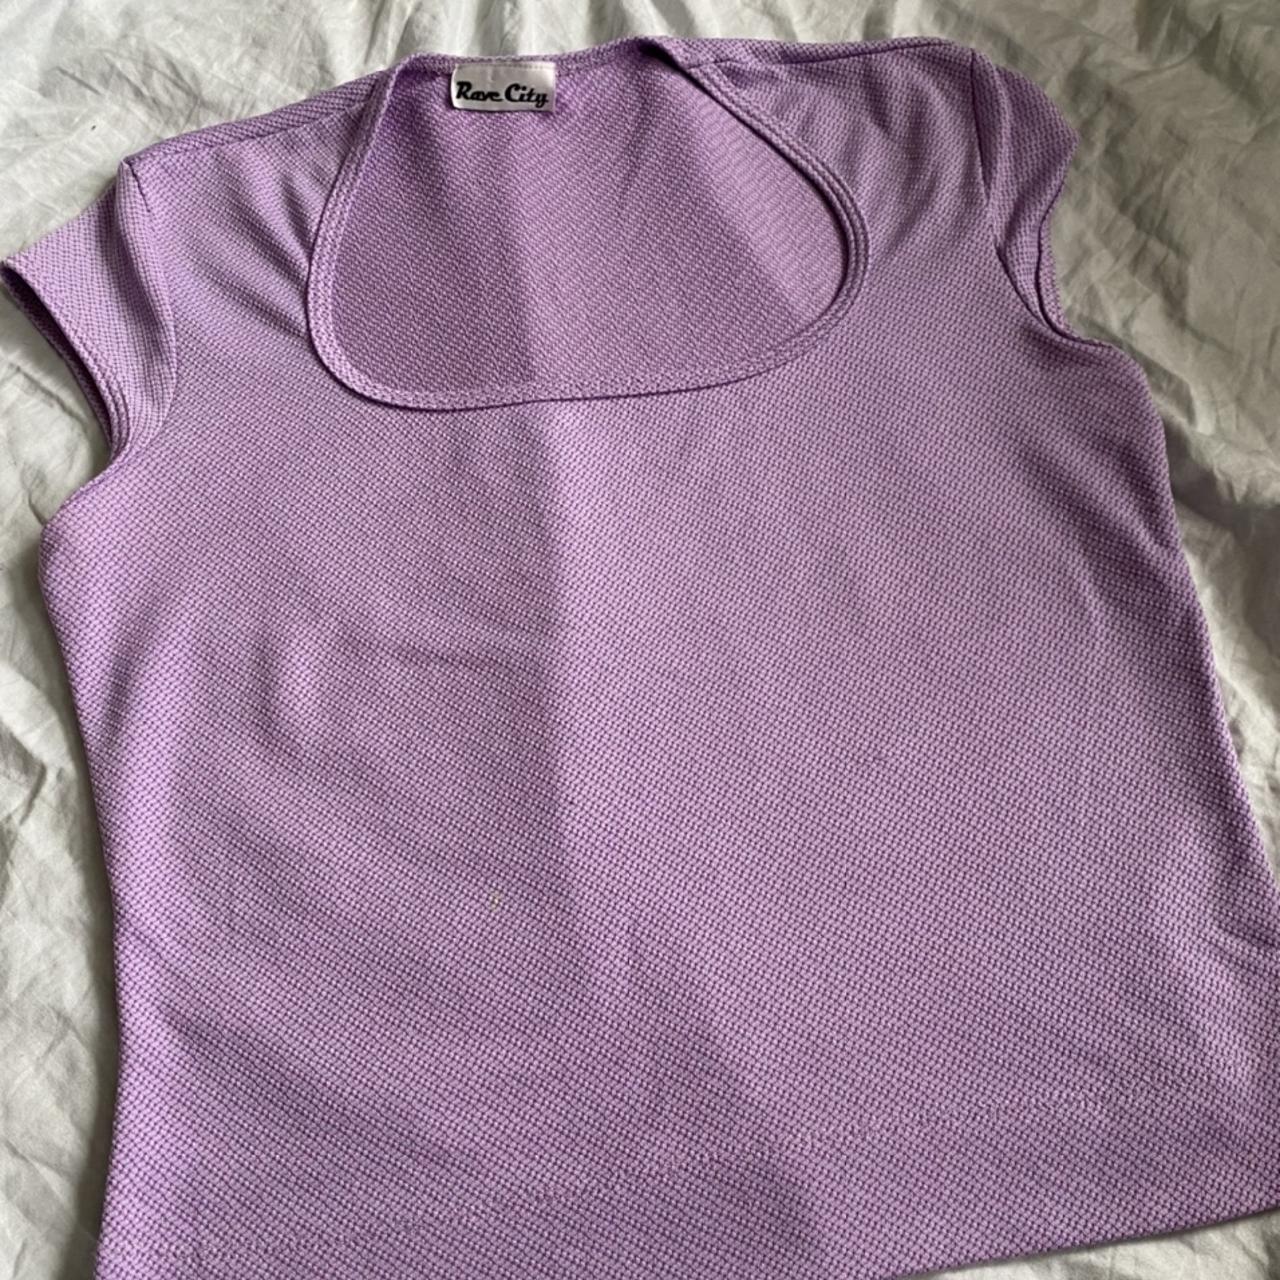 Women's Purple and White Blouse